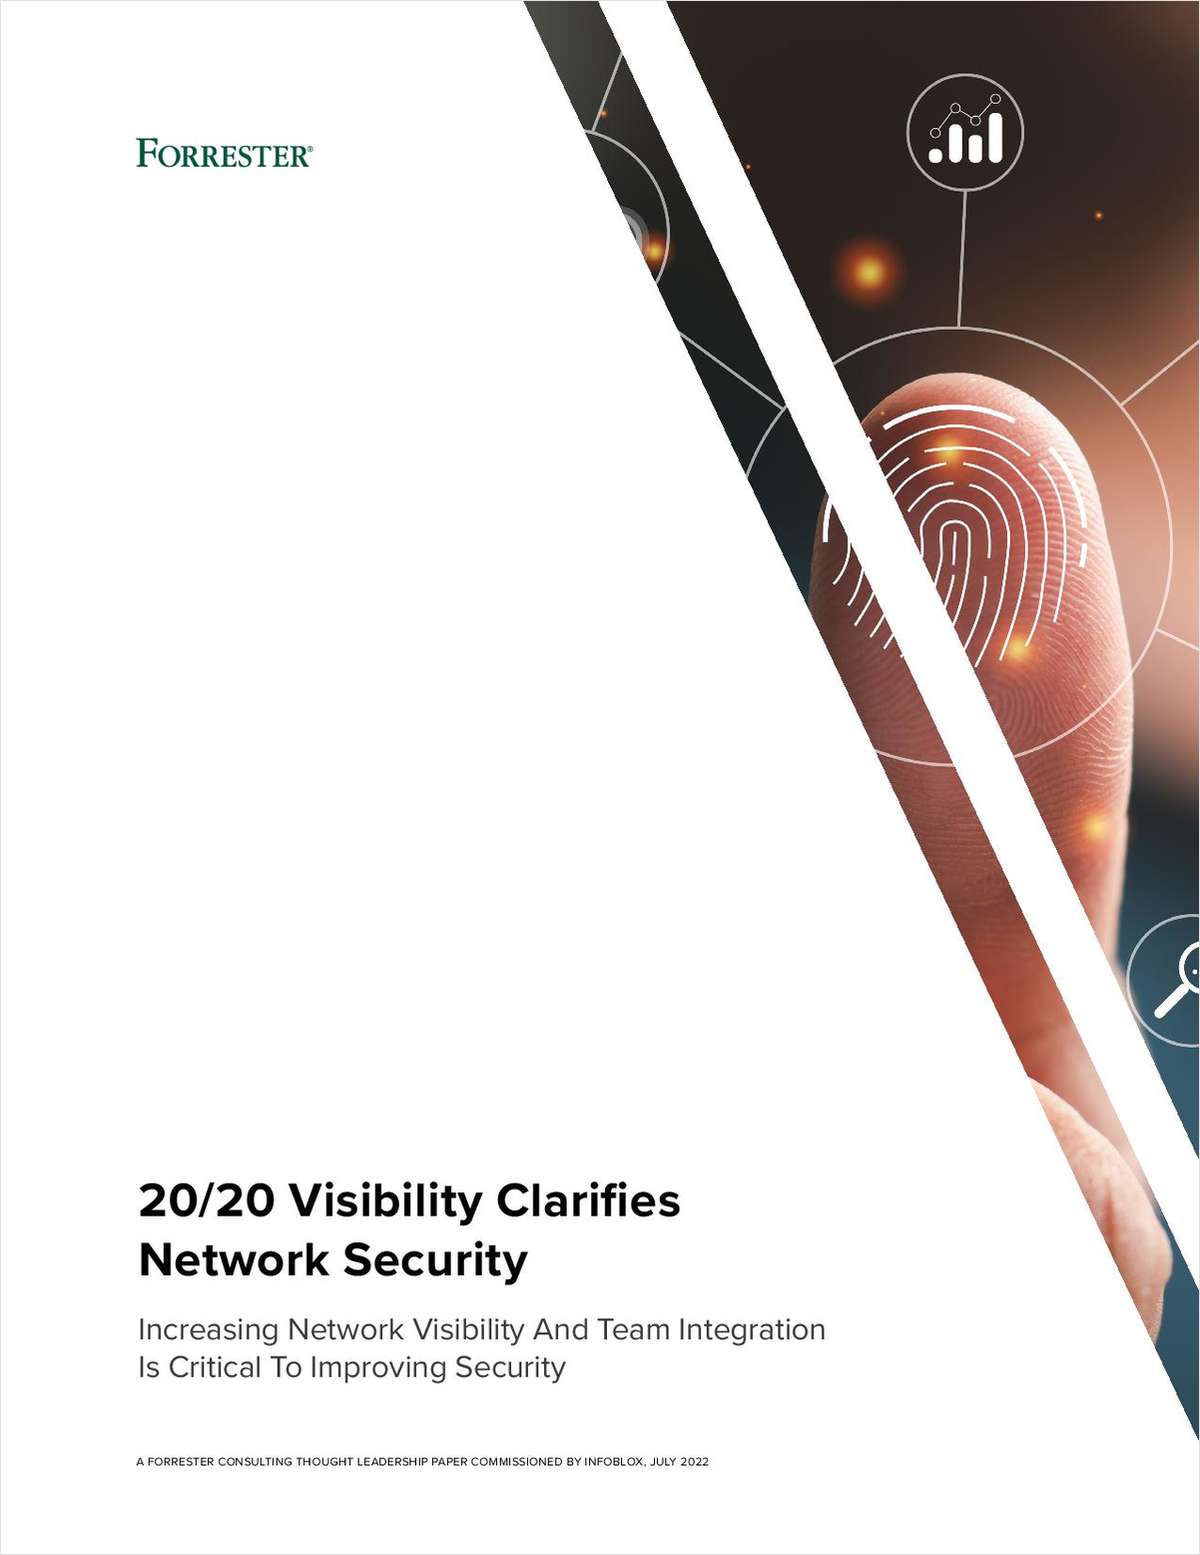 Forrester Research: 20/20 Visibility Clarifies Network Security